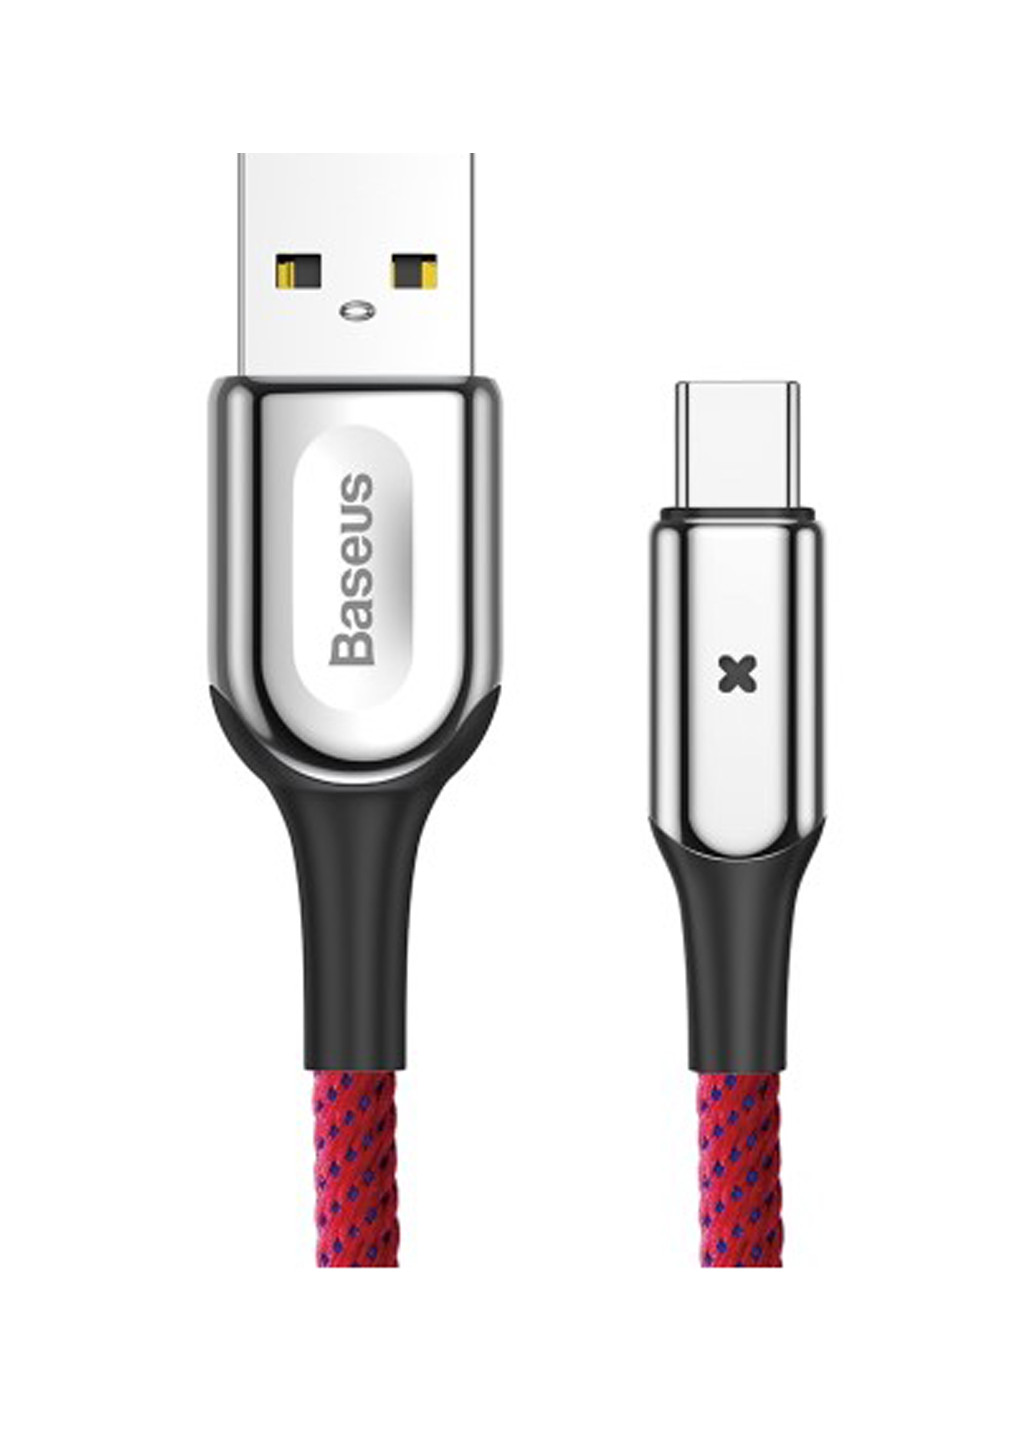 Кабель X-type Light Cable for Type-C 3A 1M Red (CATXD-A09) Baseus x-type light cable type-c (135000209)